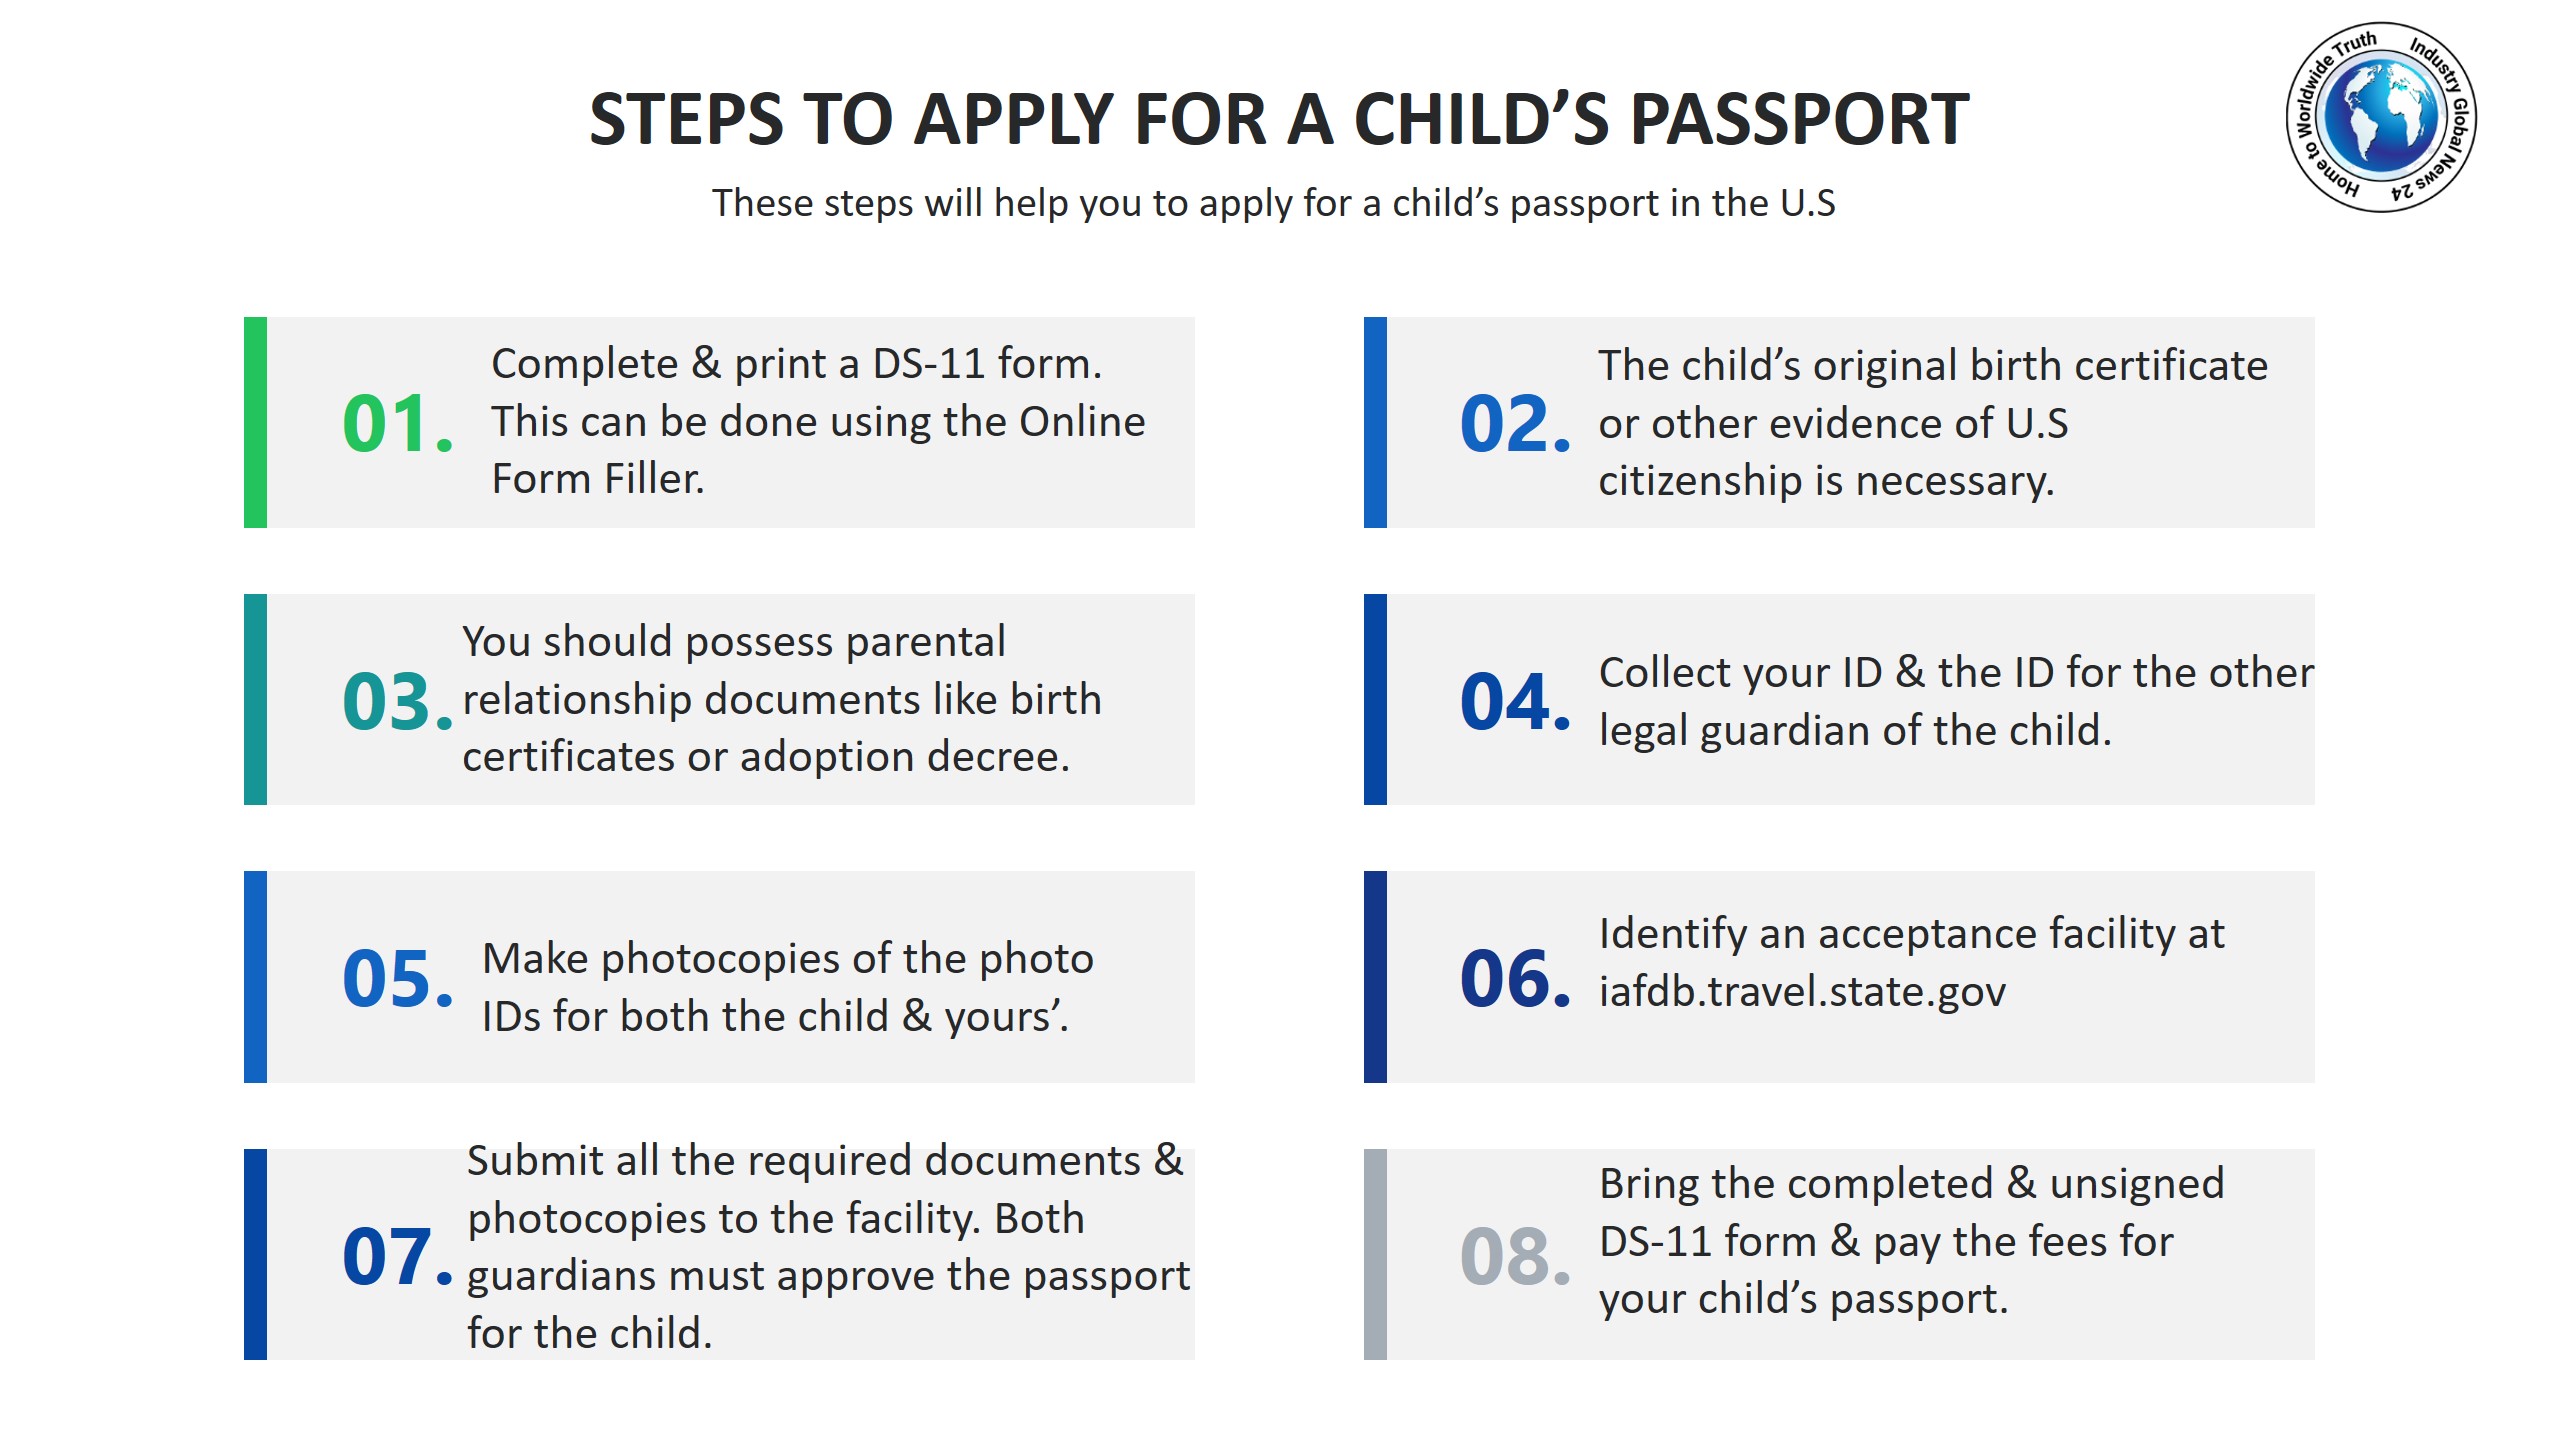 Steps to apply for a child’s passport